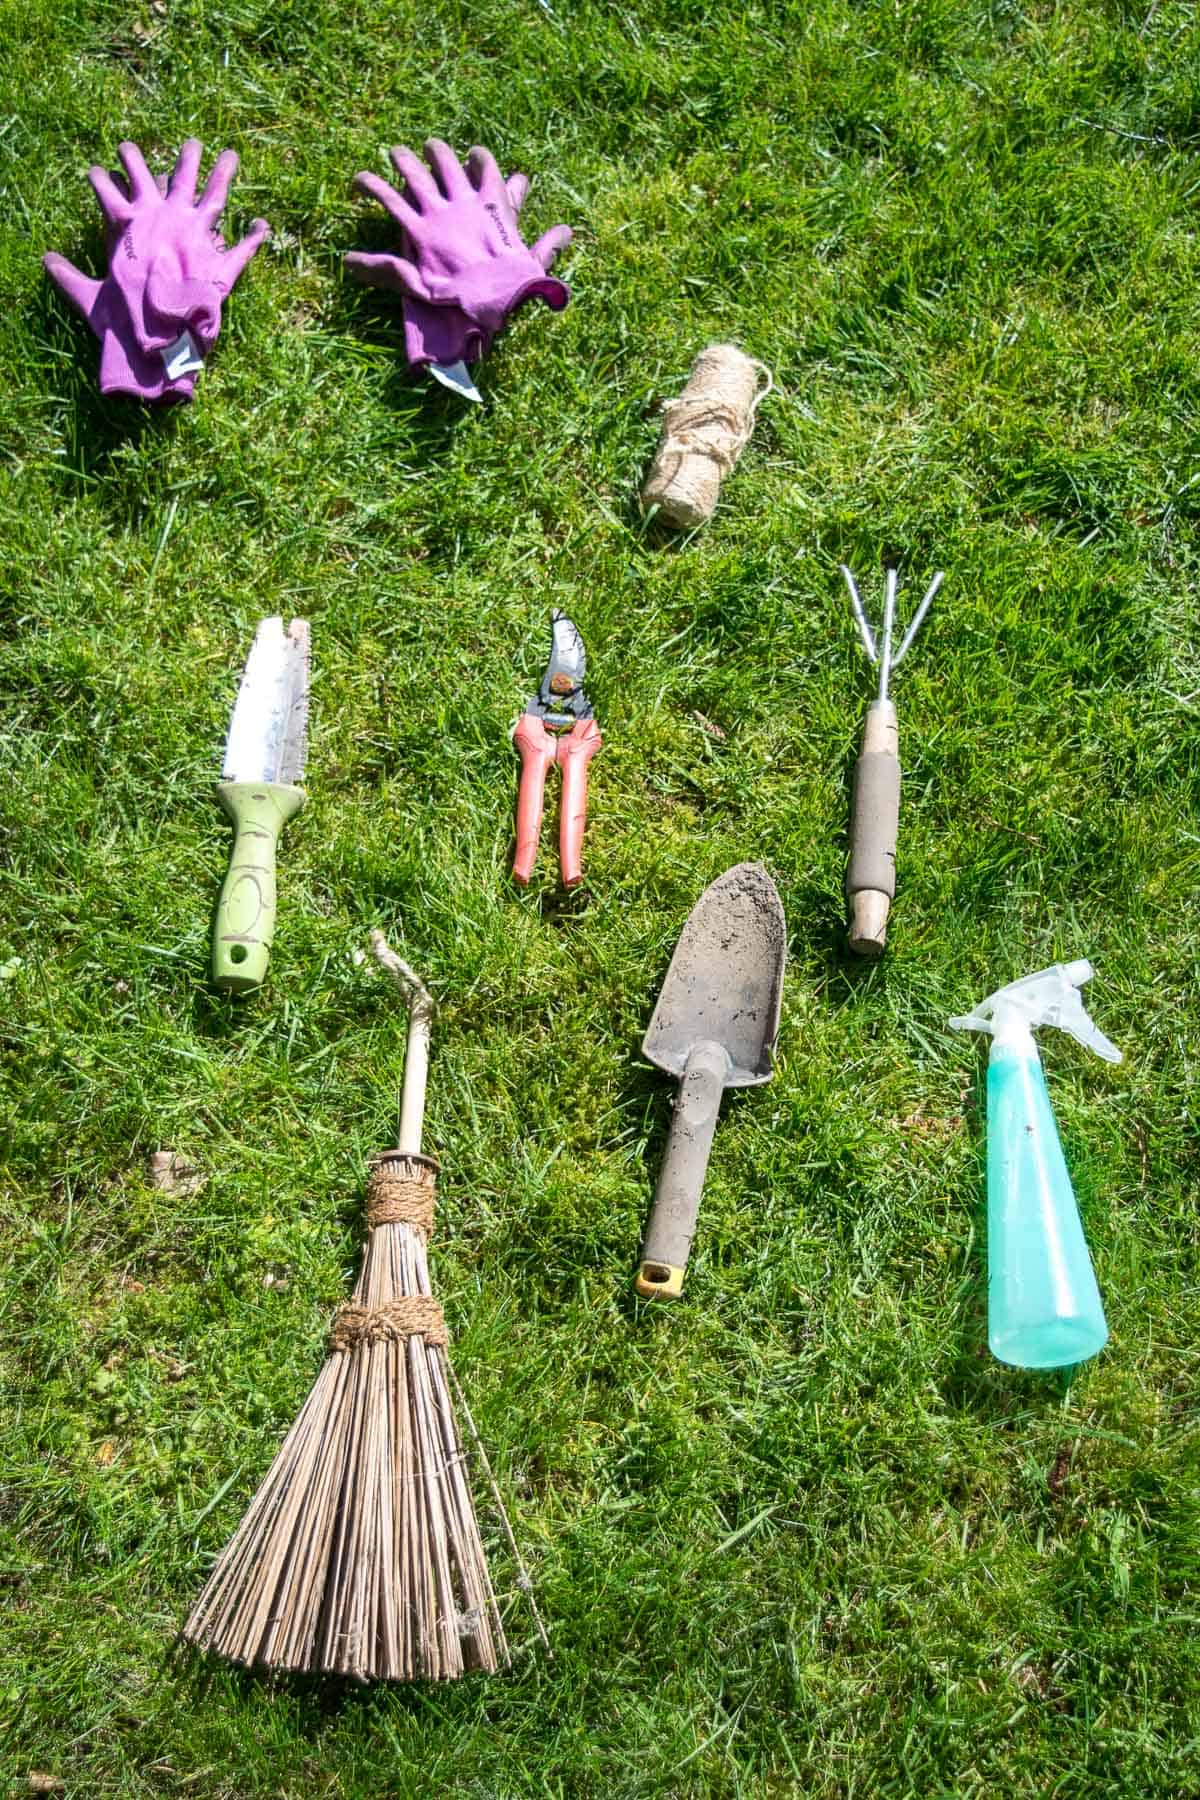 miscellaneous hand gardening tools laid out on grass